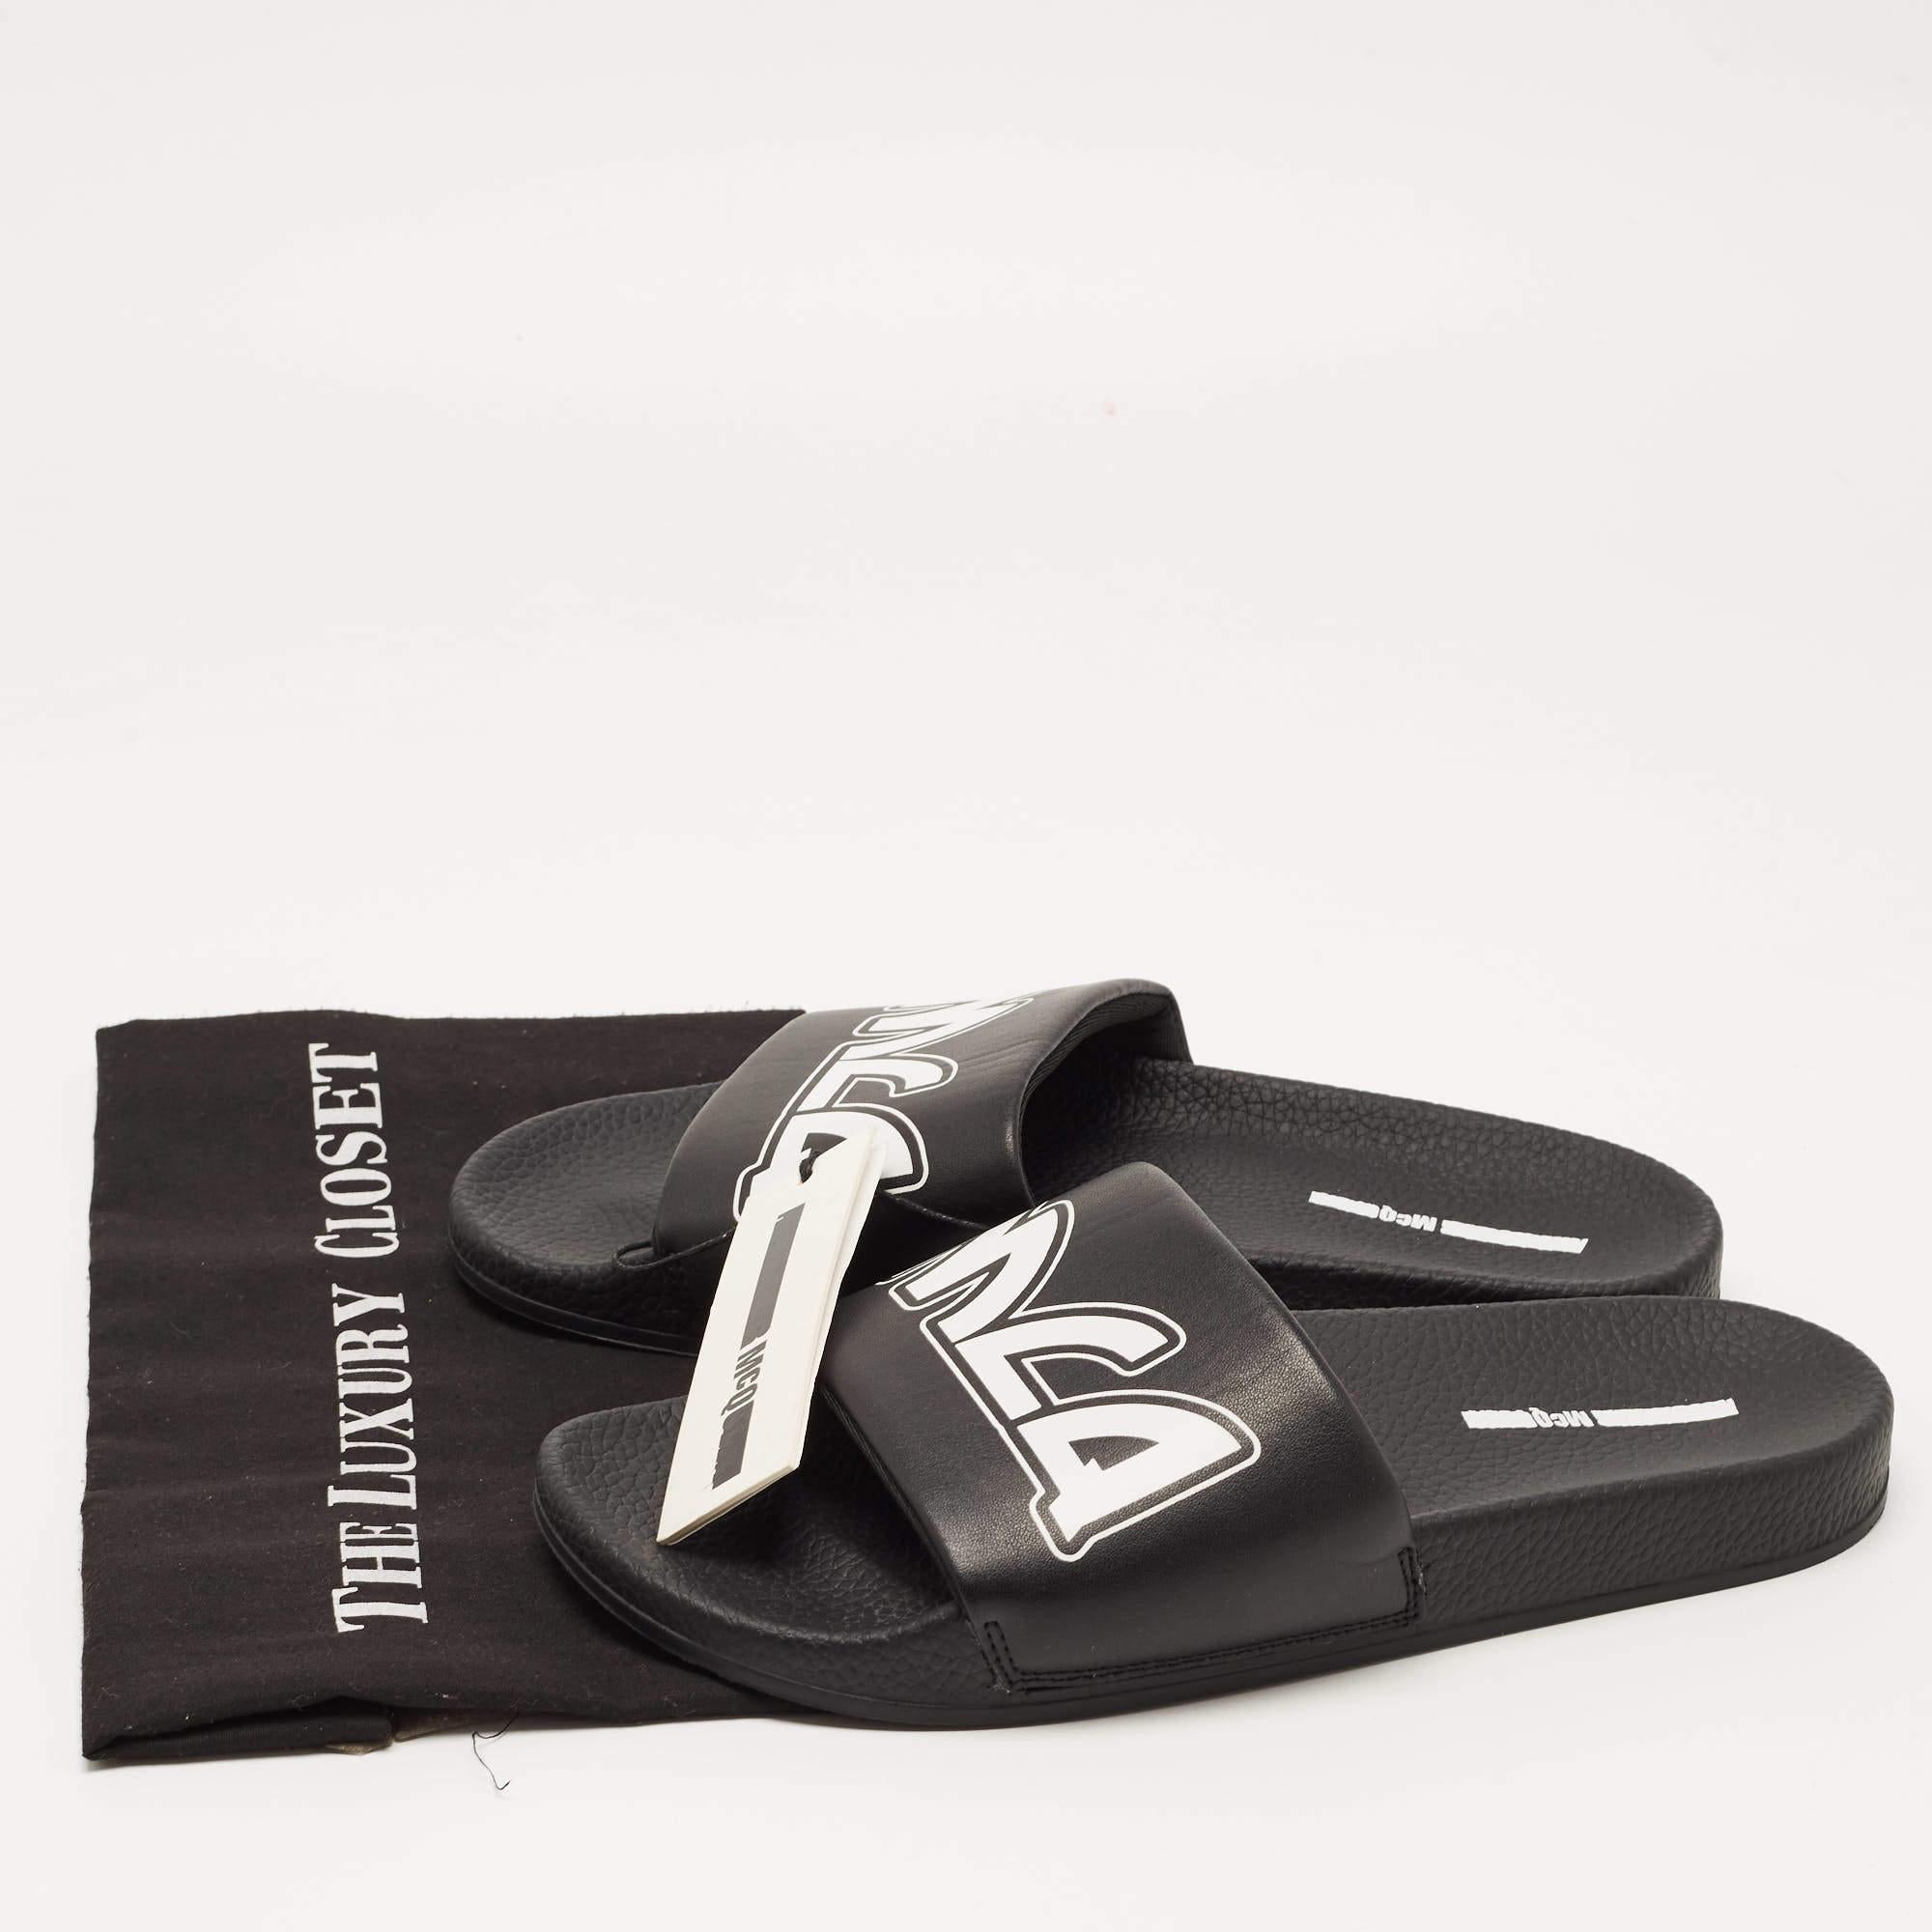 McQ by Alexander McQueen Black Faux Leather Logo Slides Size 42 5